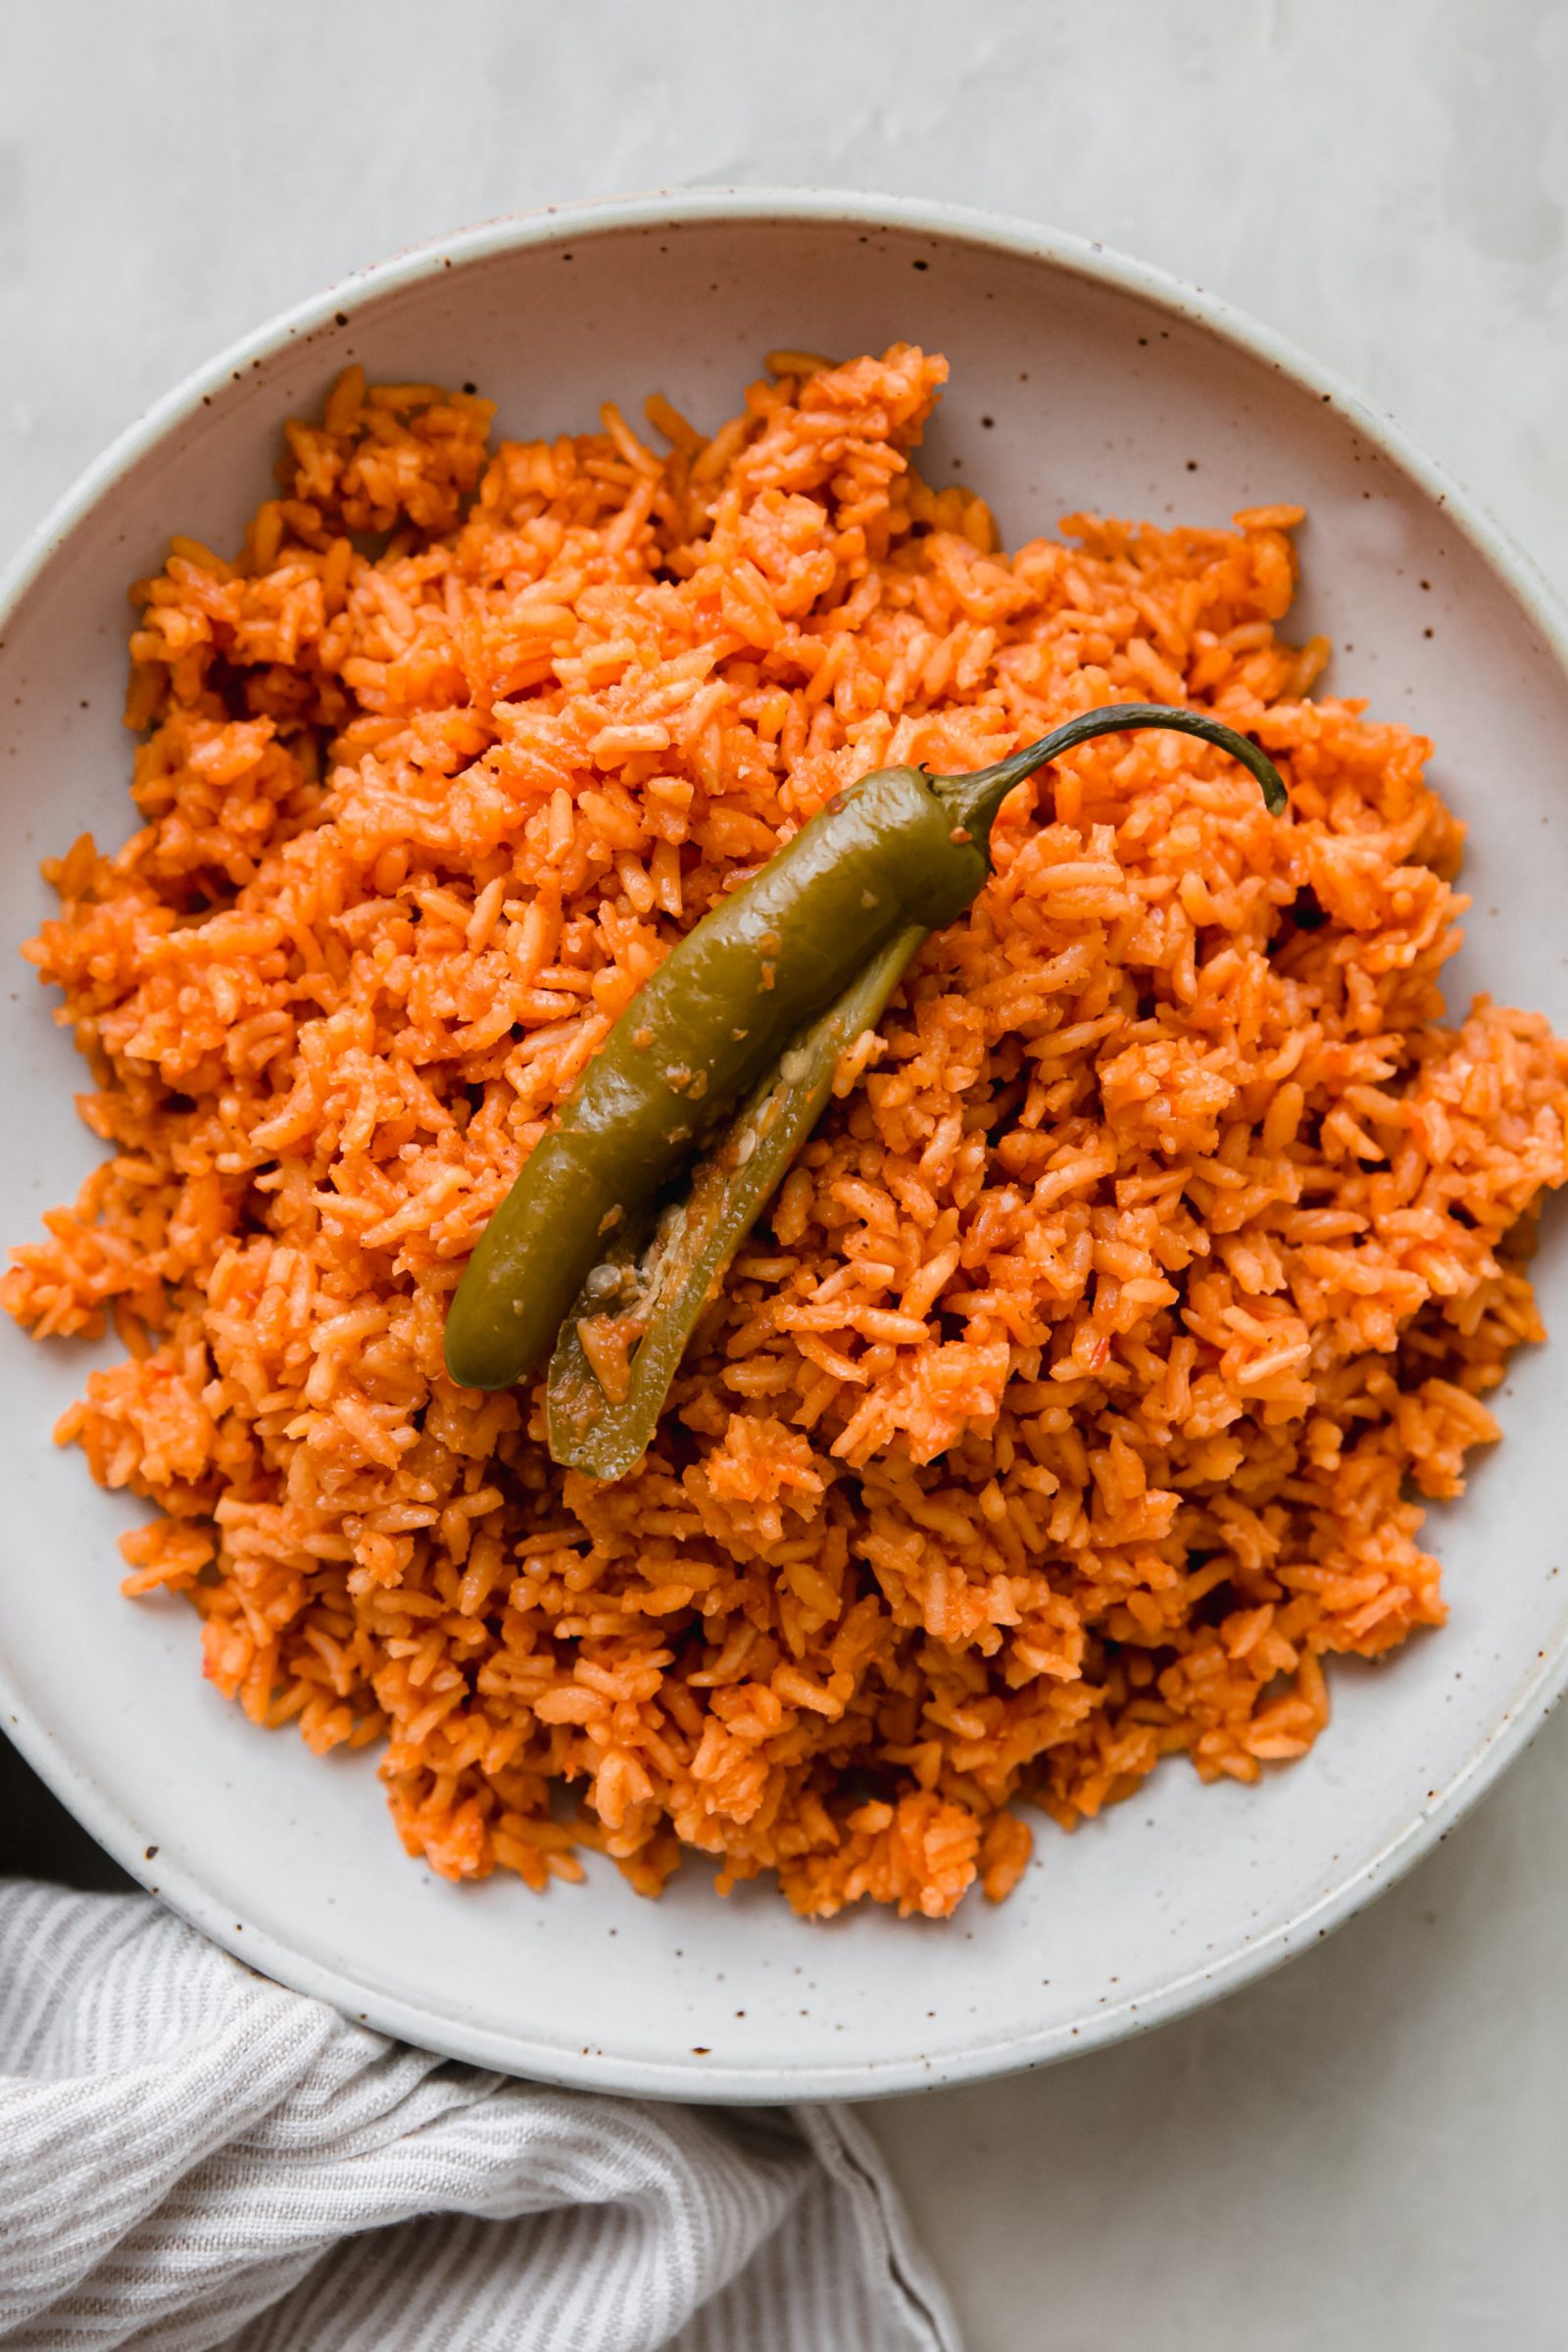 Restaurant-Style Mexican Rice Recipe | Little Spice Jar